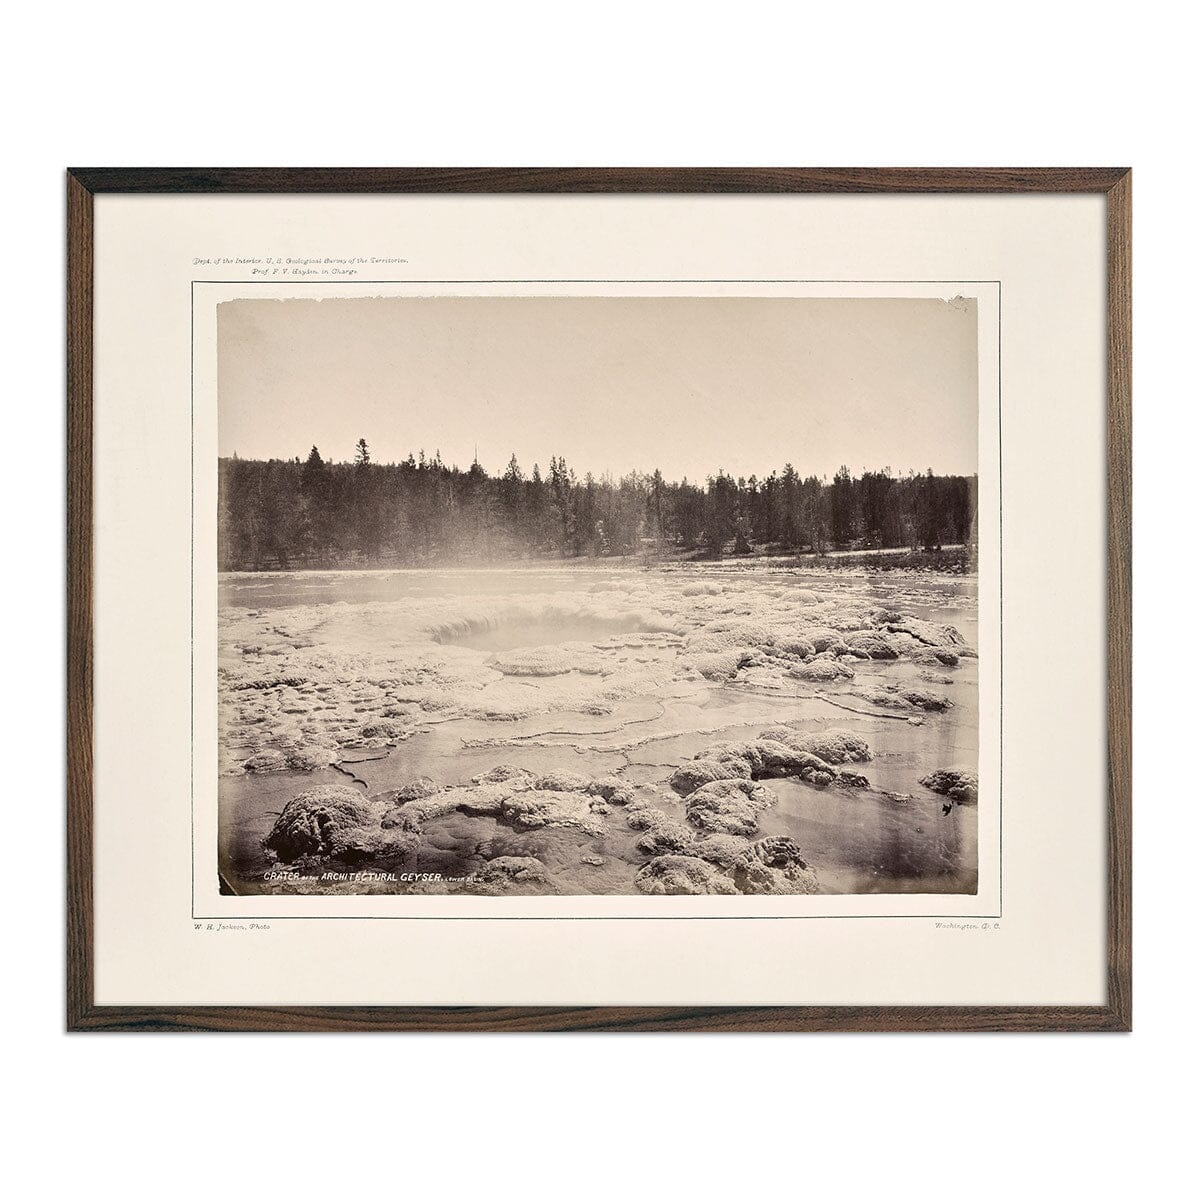 Crater of the Architectural Geyser, Lower Basin, Yellowstone 1873